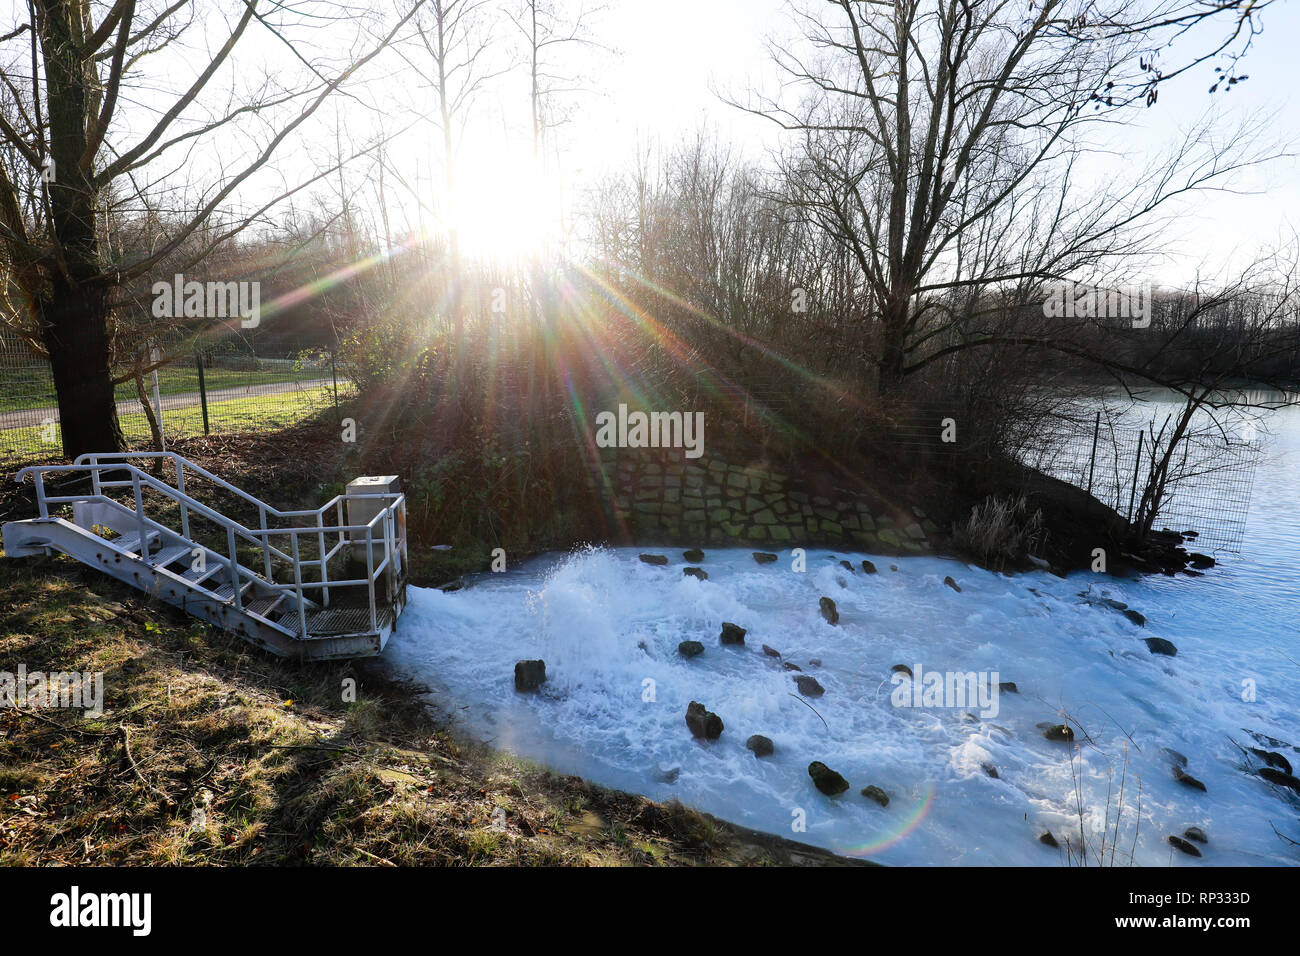 18.01.2019, Bochum, North Rhine-Westphalia, Germany - The mineral-rich shaft water from the disused Robert Mueser mine is discharged from a depth of 5 Stock Photo